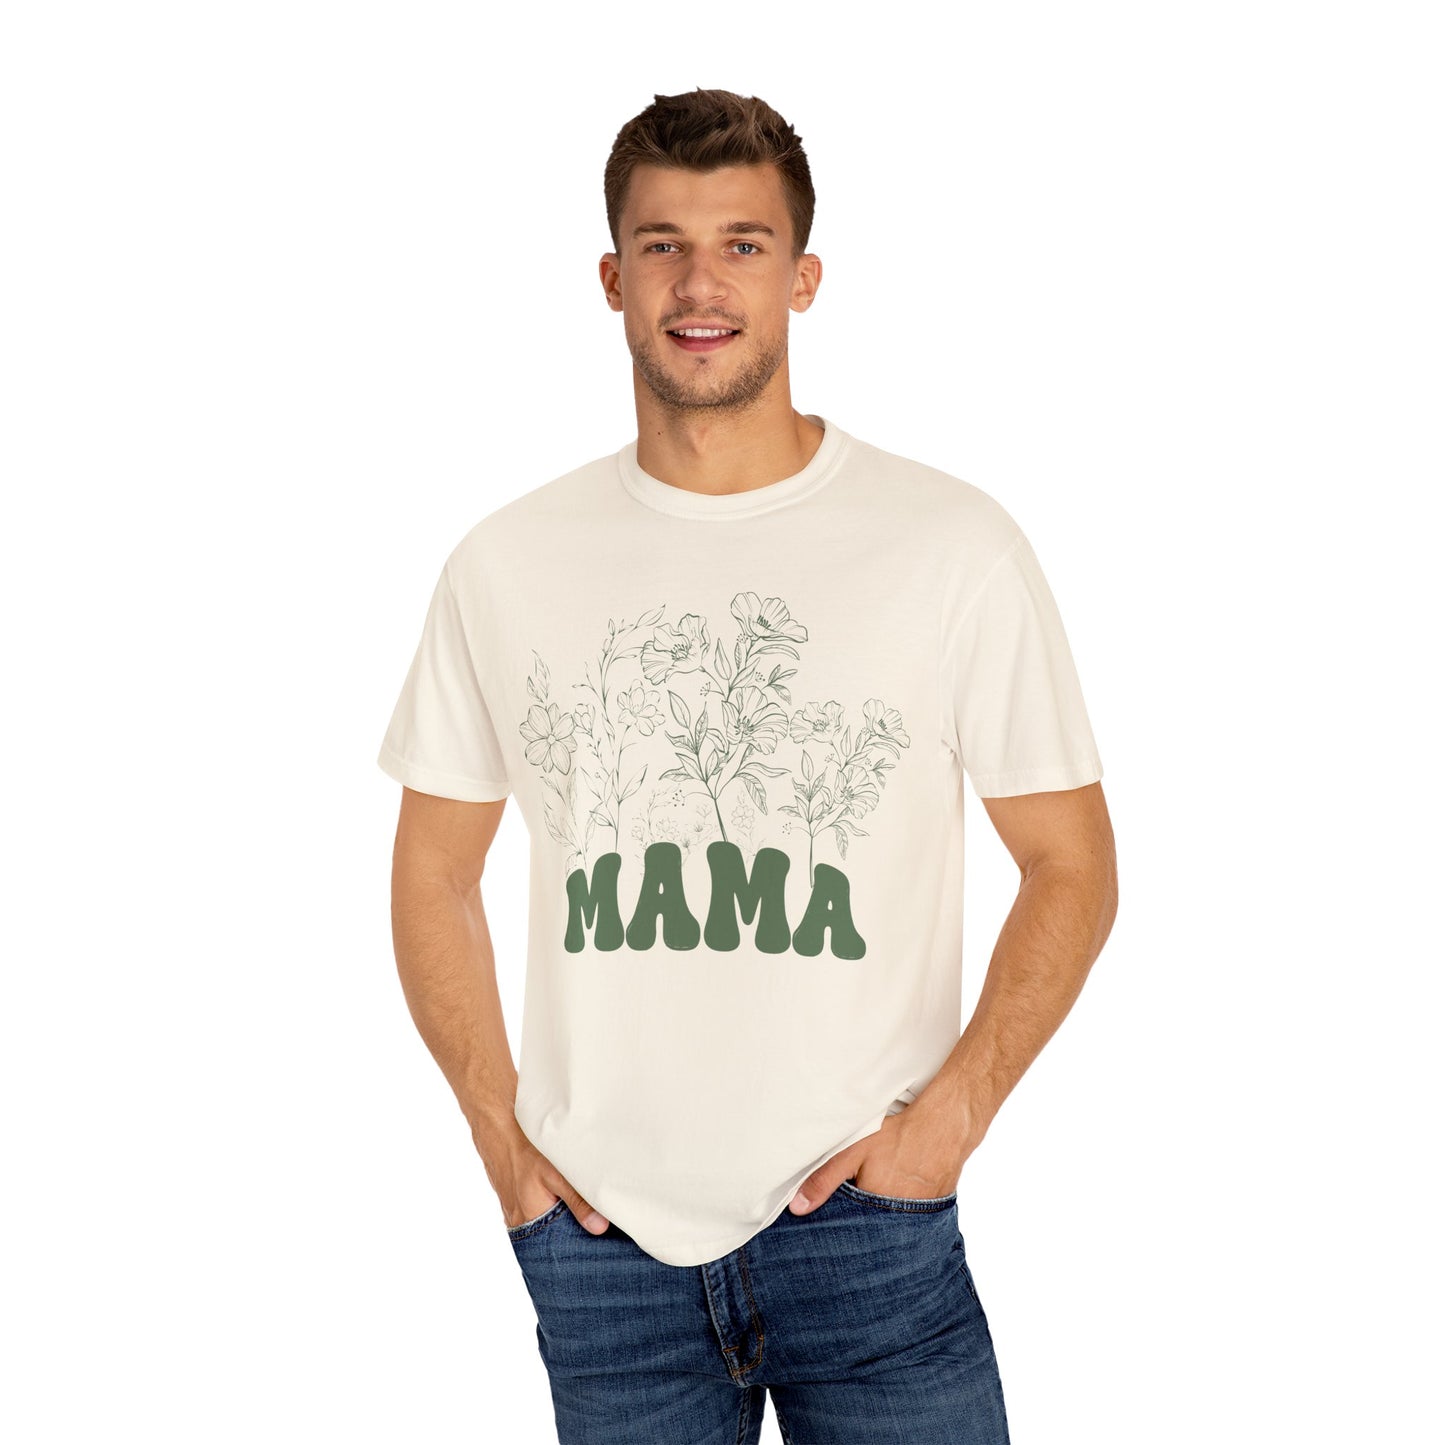 Wildflowers Mama Shirt, Mama Shirt, Retro Mom TShirt, Mother's Day Gift, Flower Shirts for Women, Floral New Mom Gift, Comfort Colors CC1592